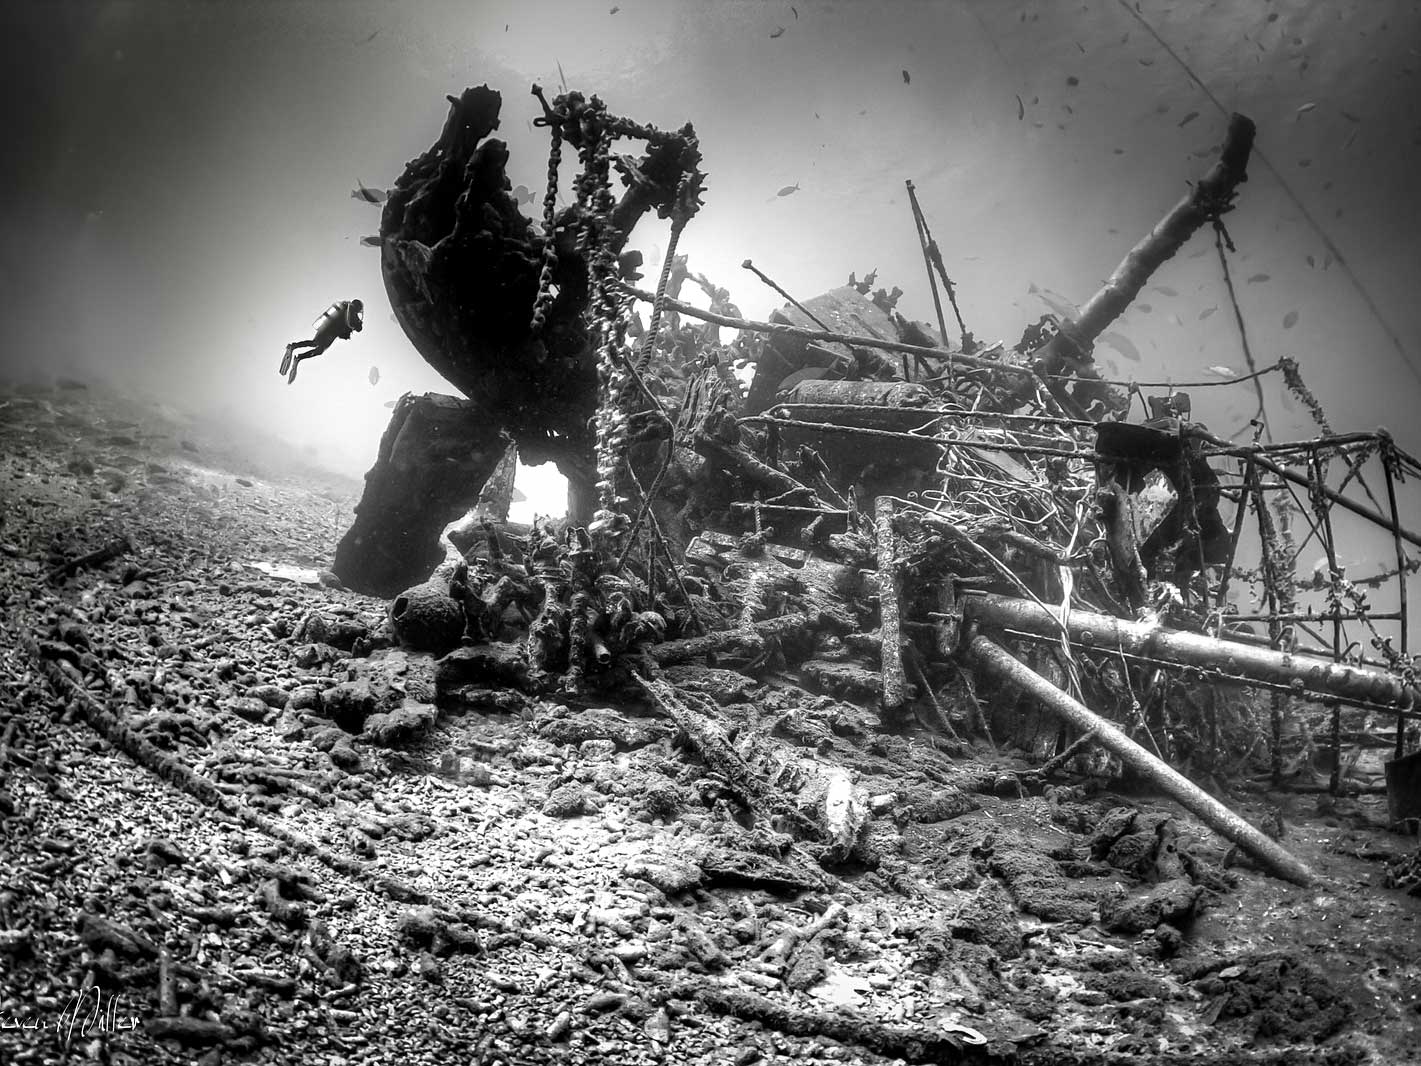 Underwater Wreck Photography Settings and Technique